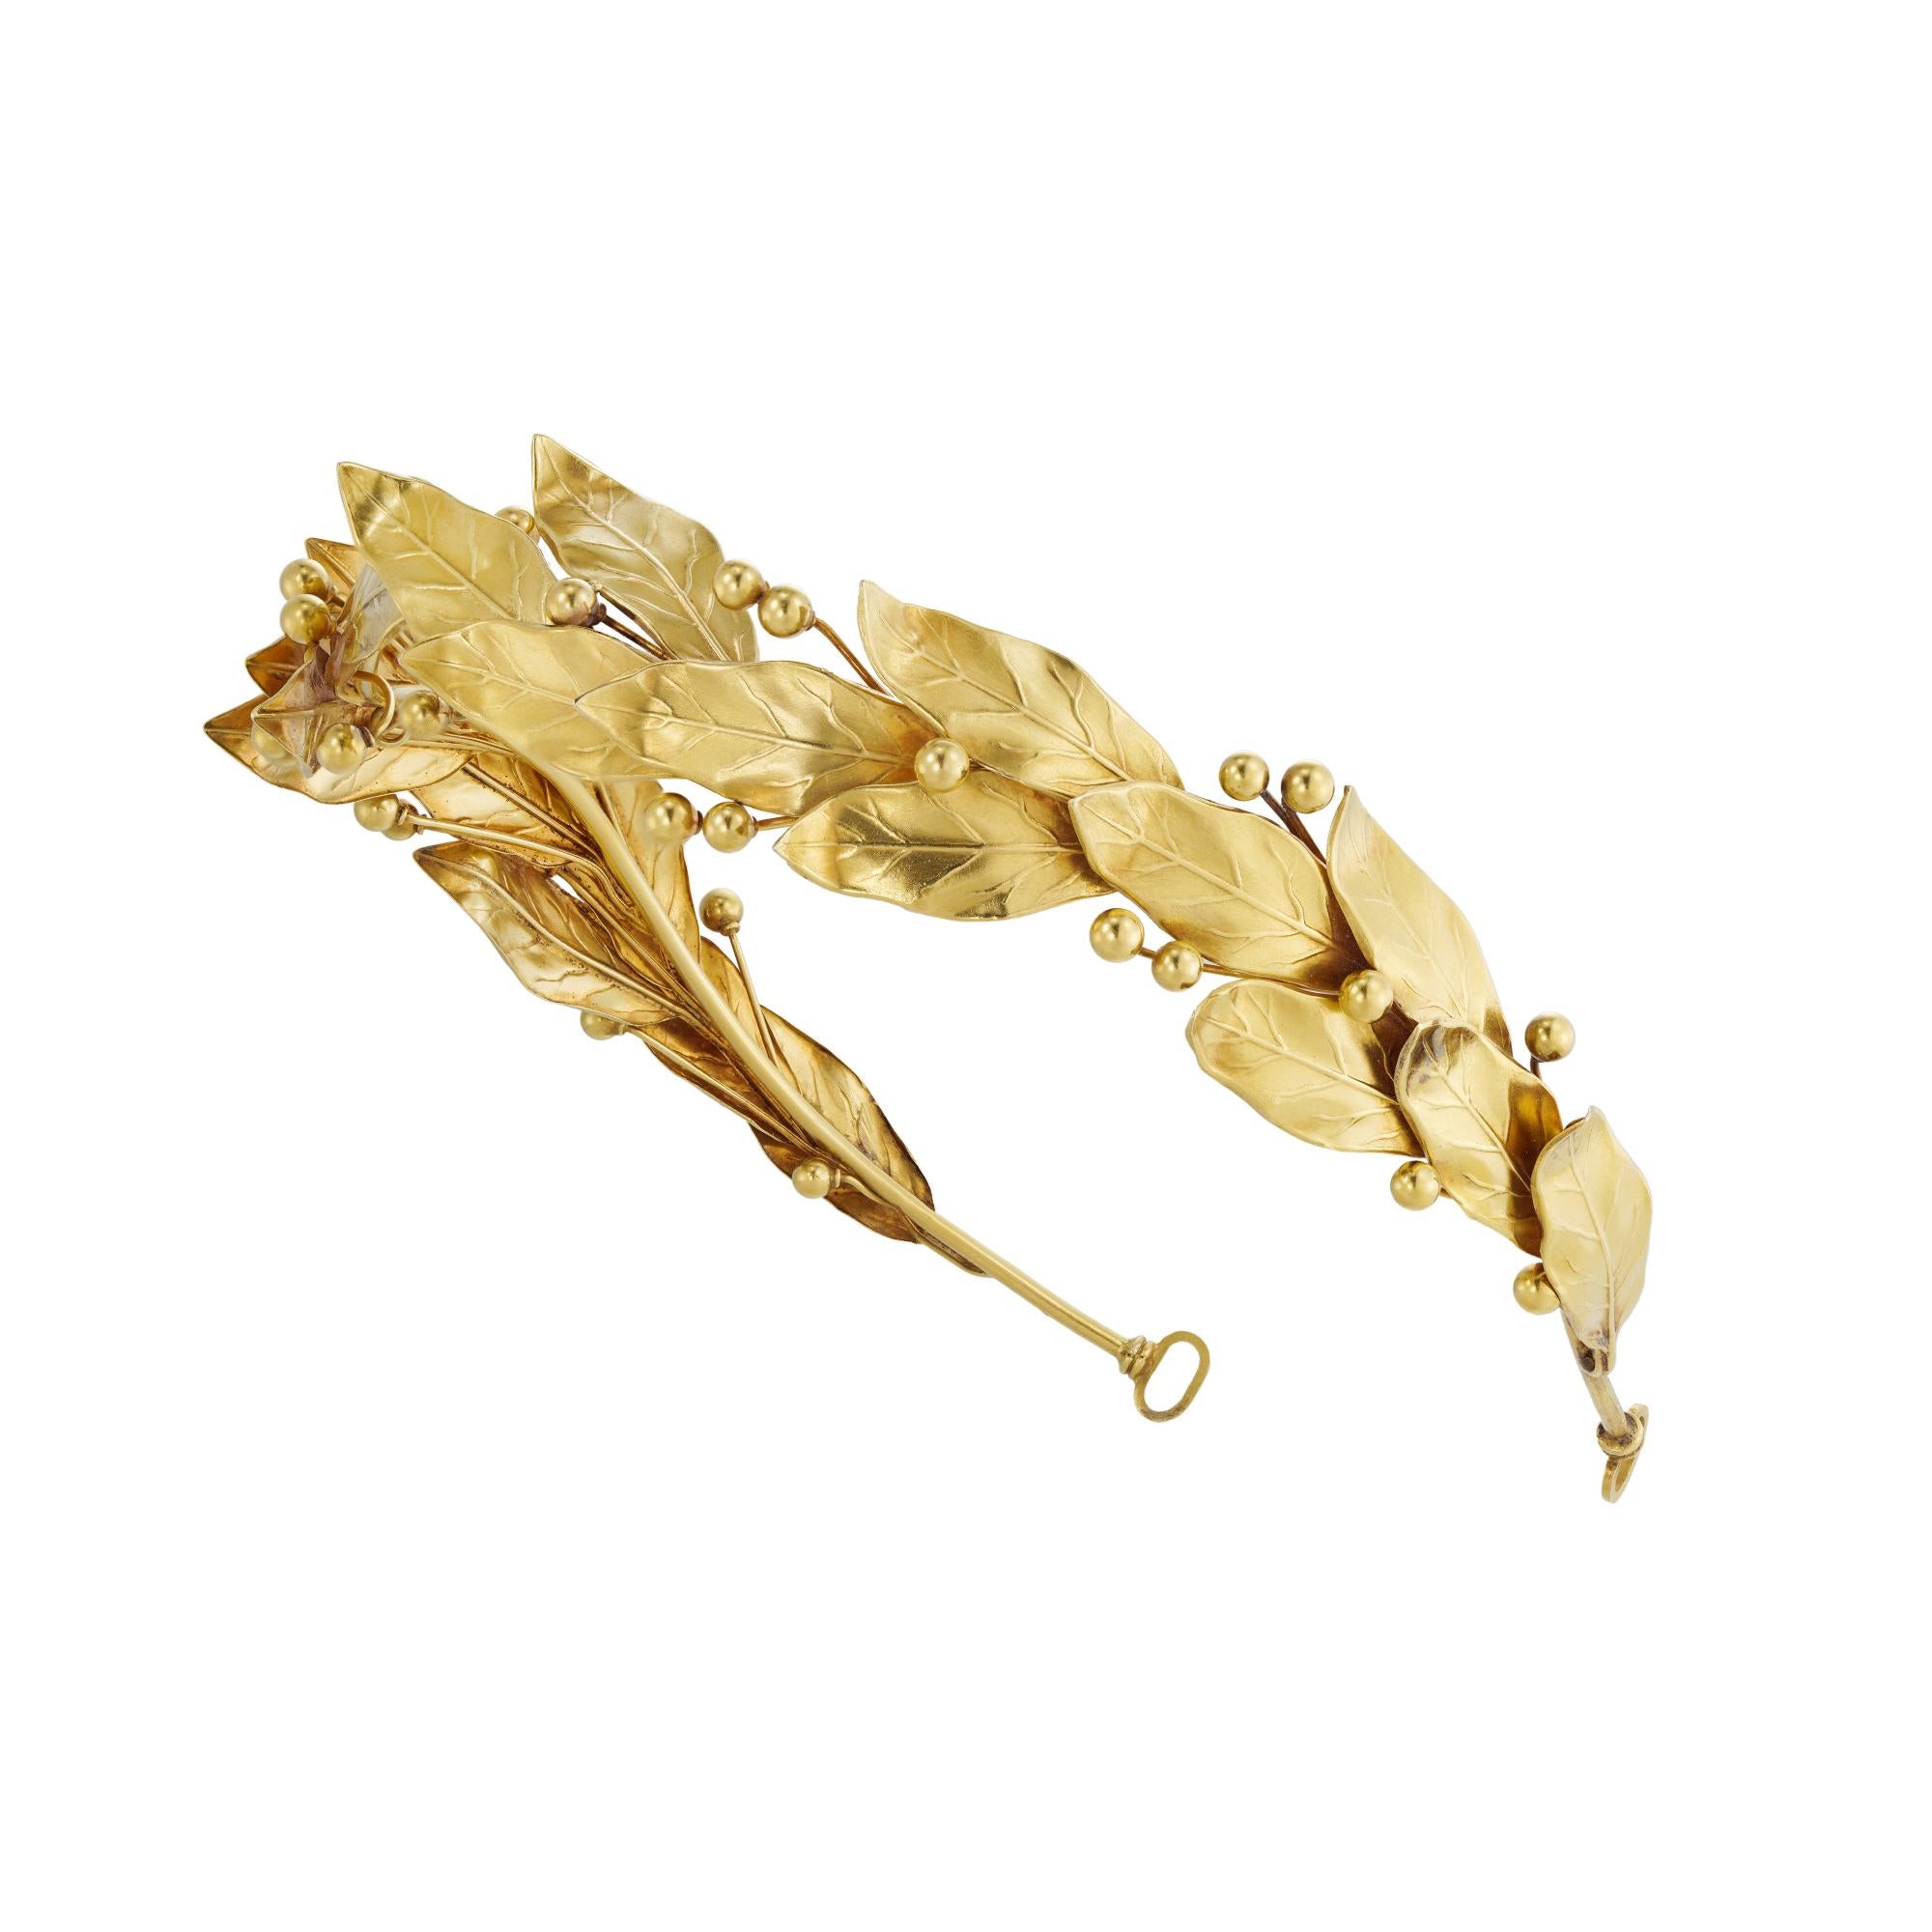 Victorian Archaeological Revival Gold Tiara